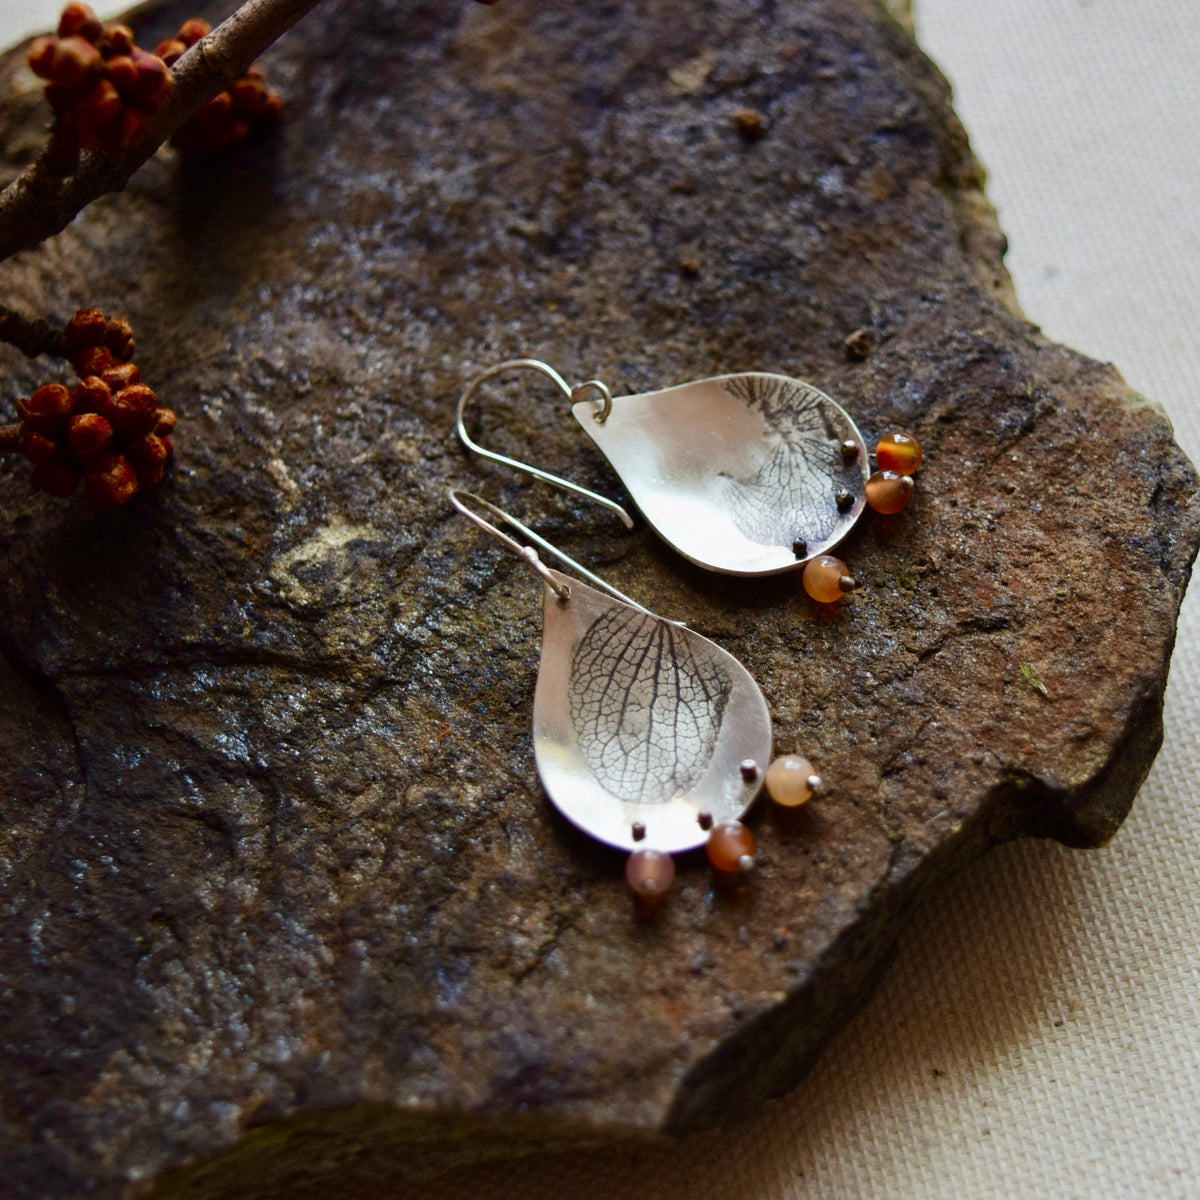 Drop Leaf Earrings with peach agate stone - Small